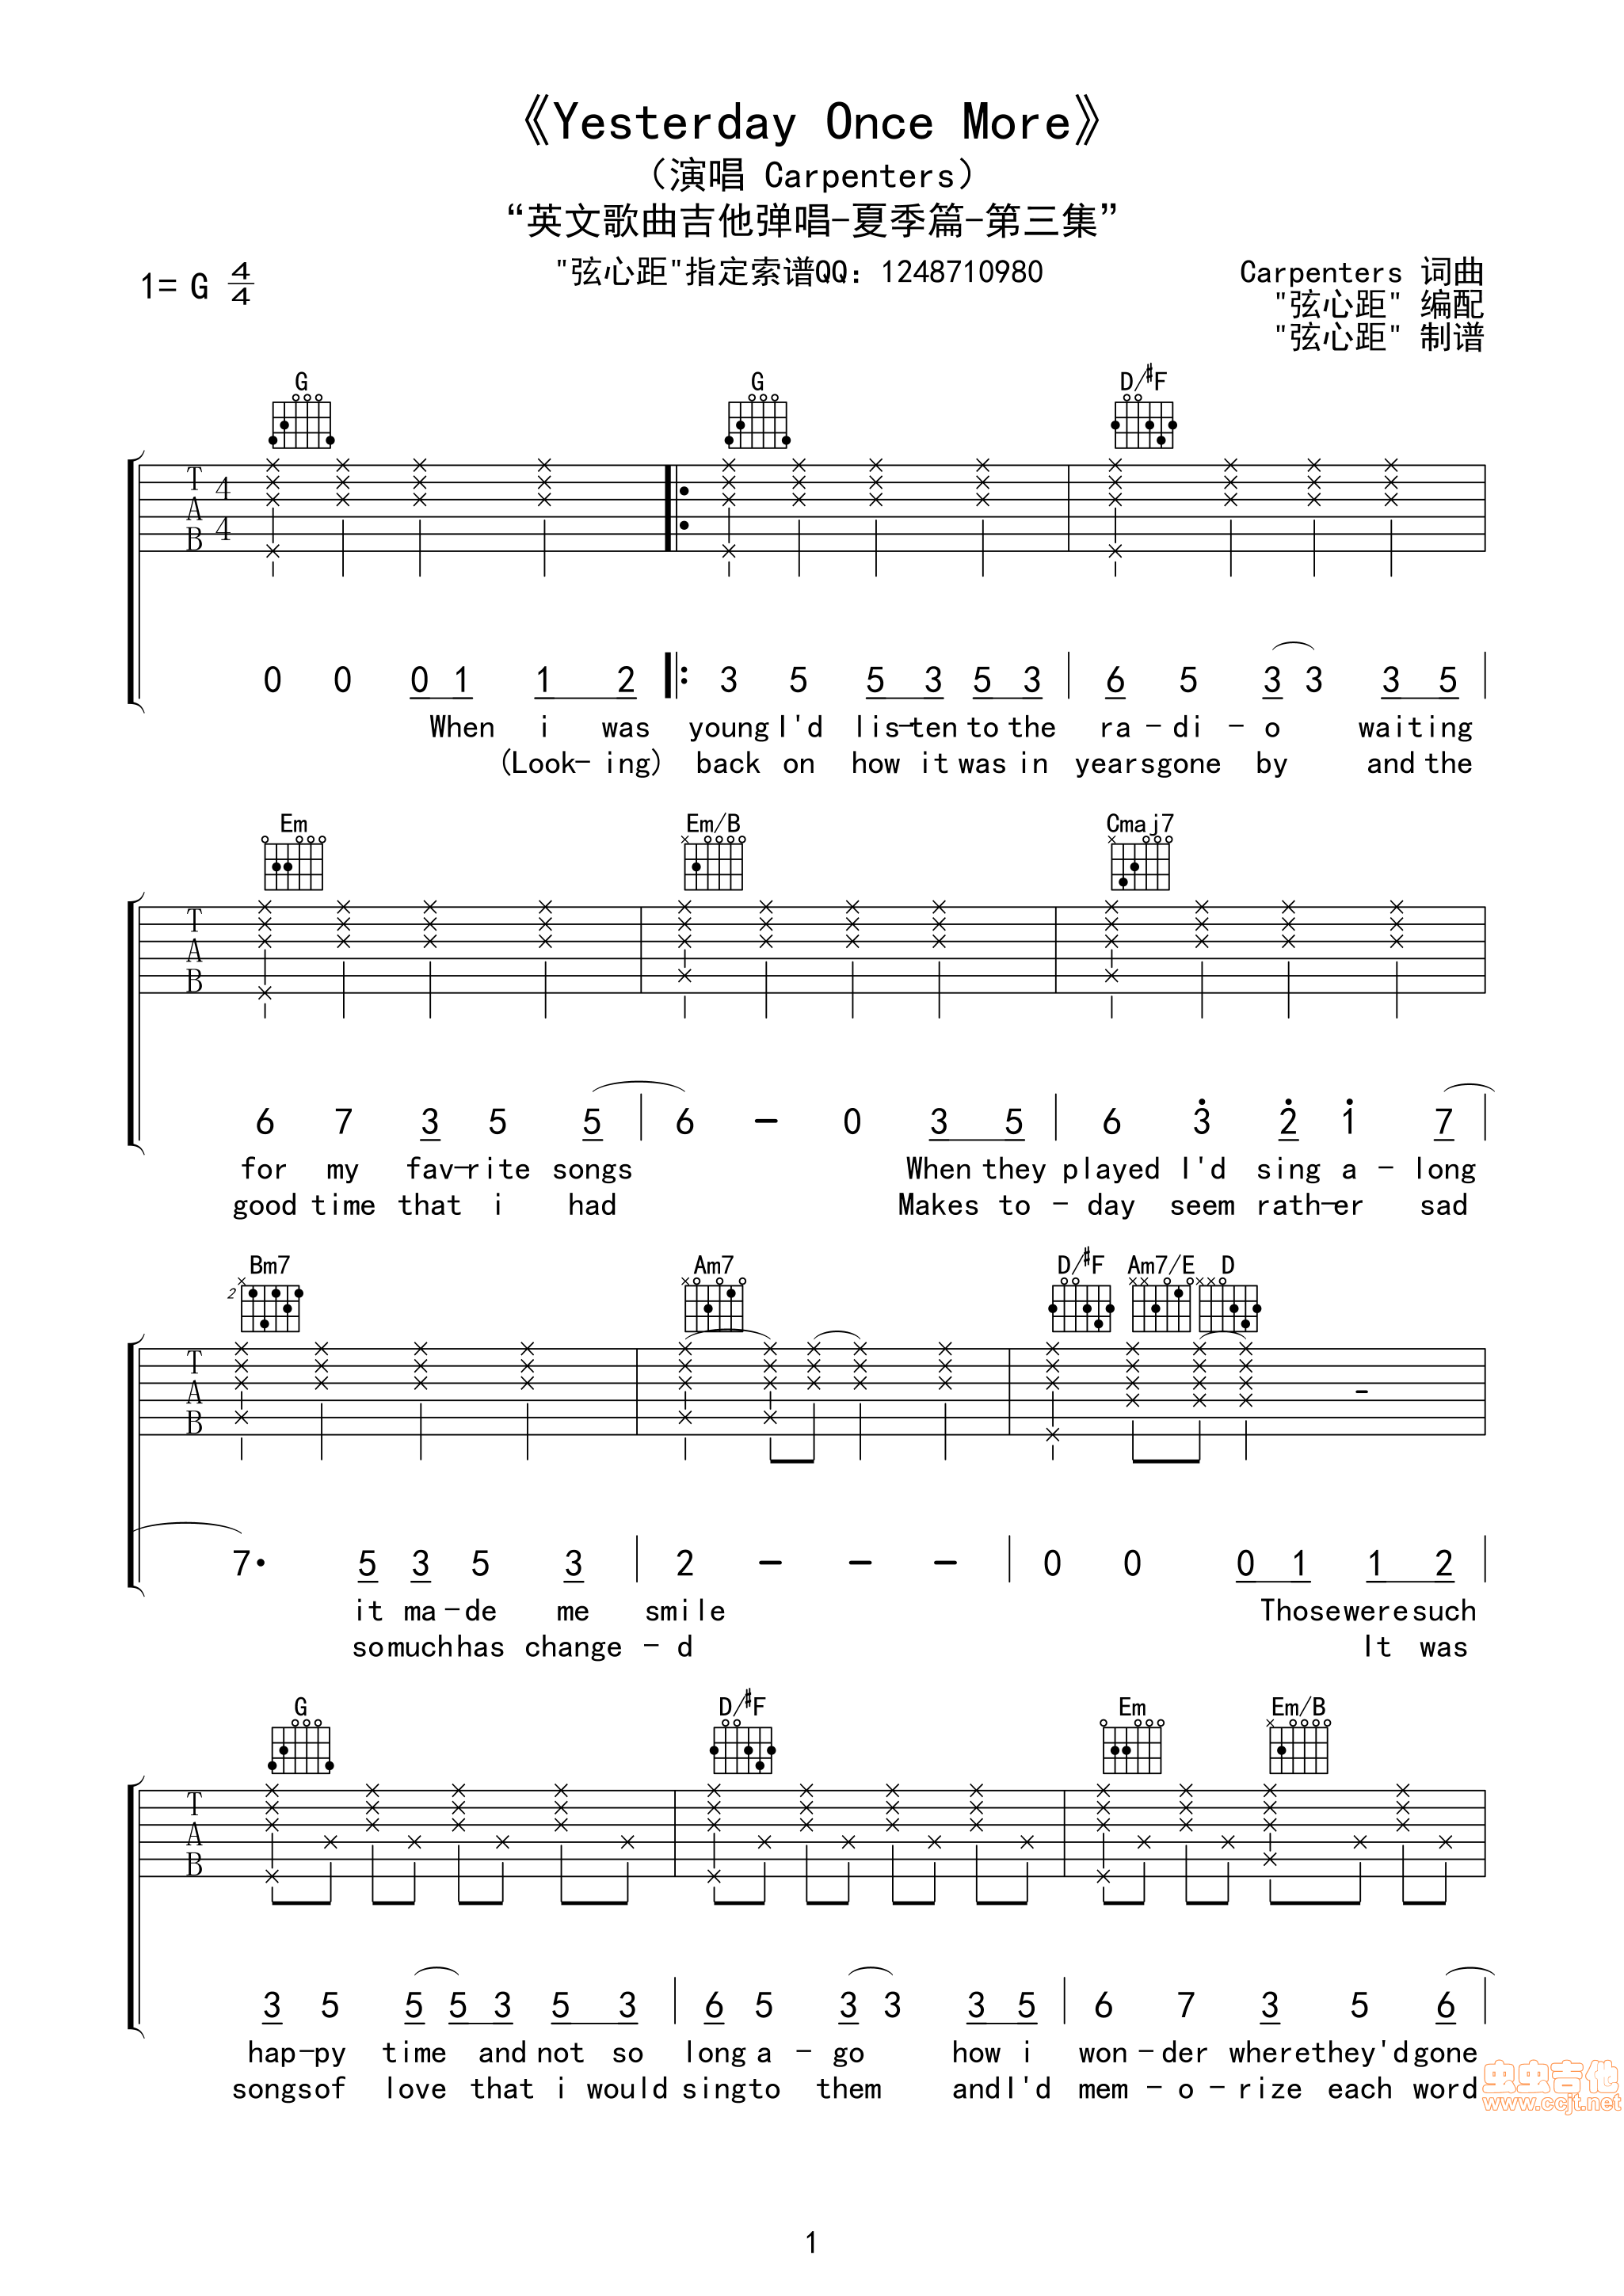 Yesterday Once More By The Carpenters Guitar Tabs Chords Sheet